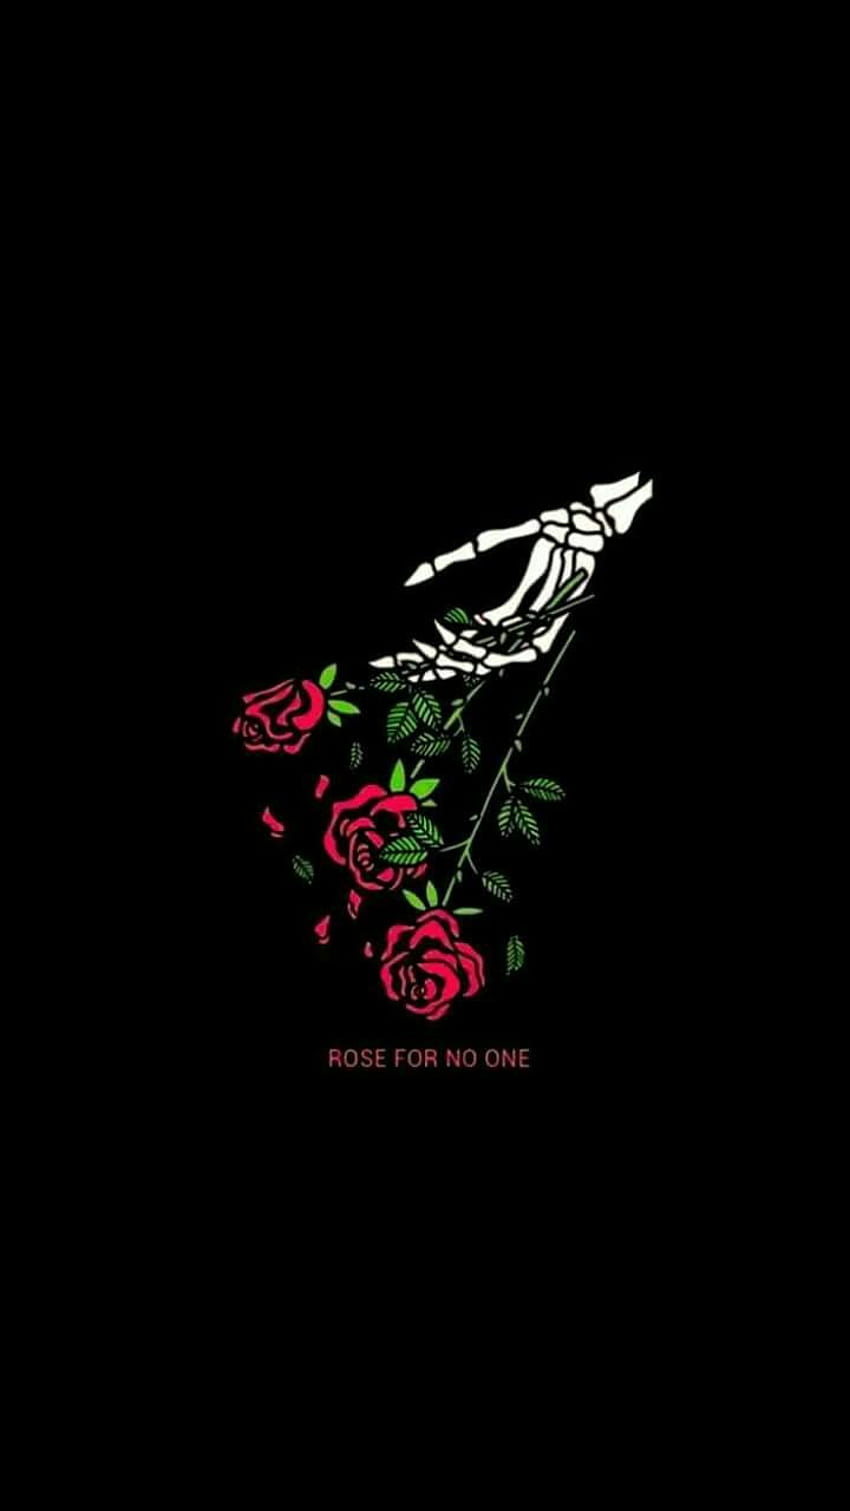 Rose for no one wallpaper - Punk